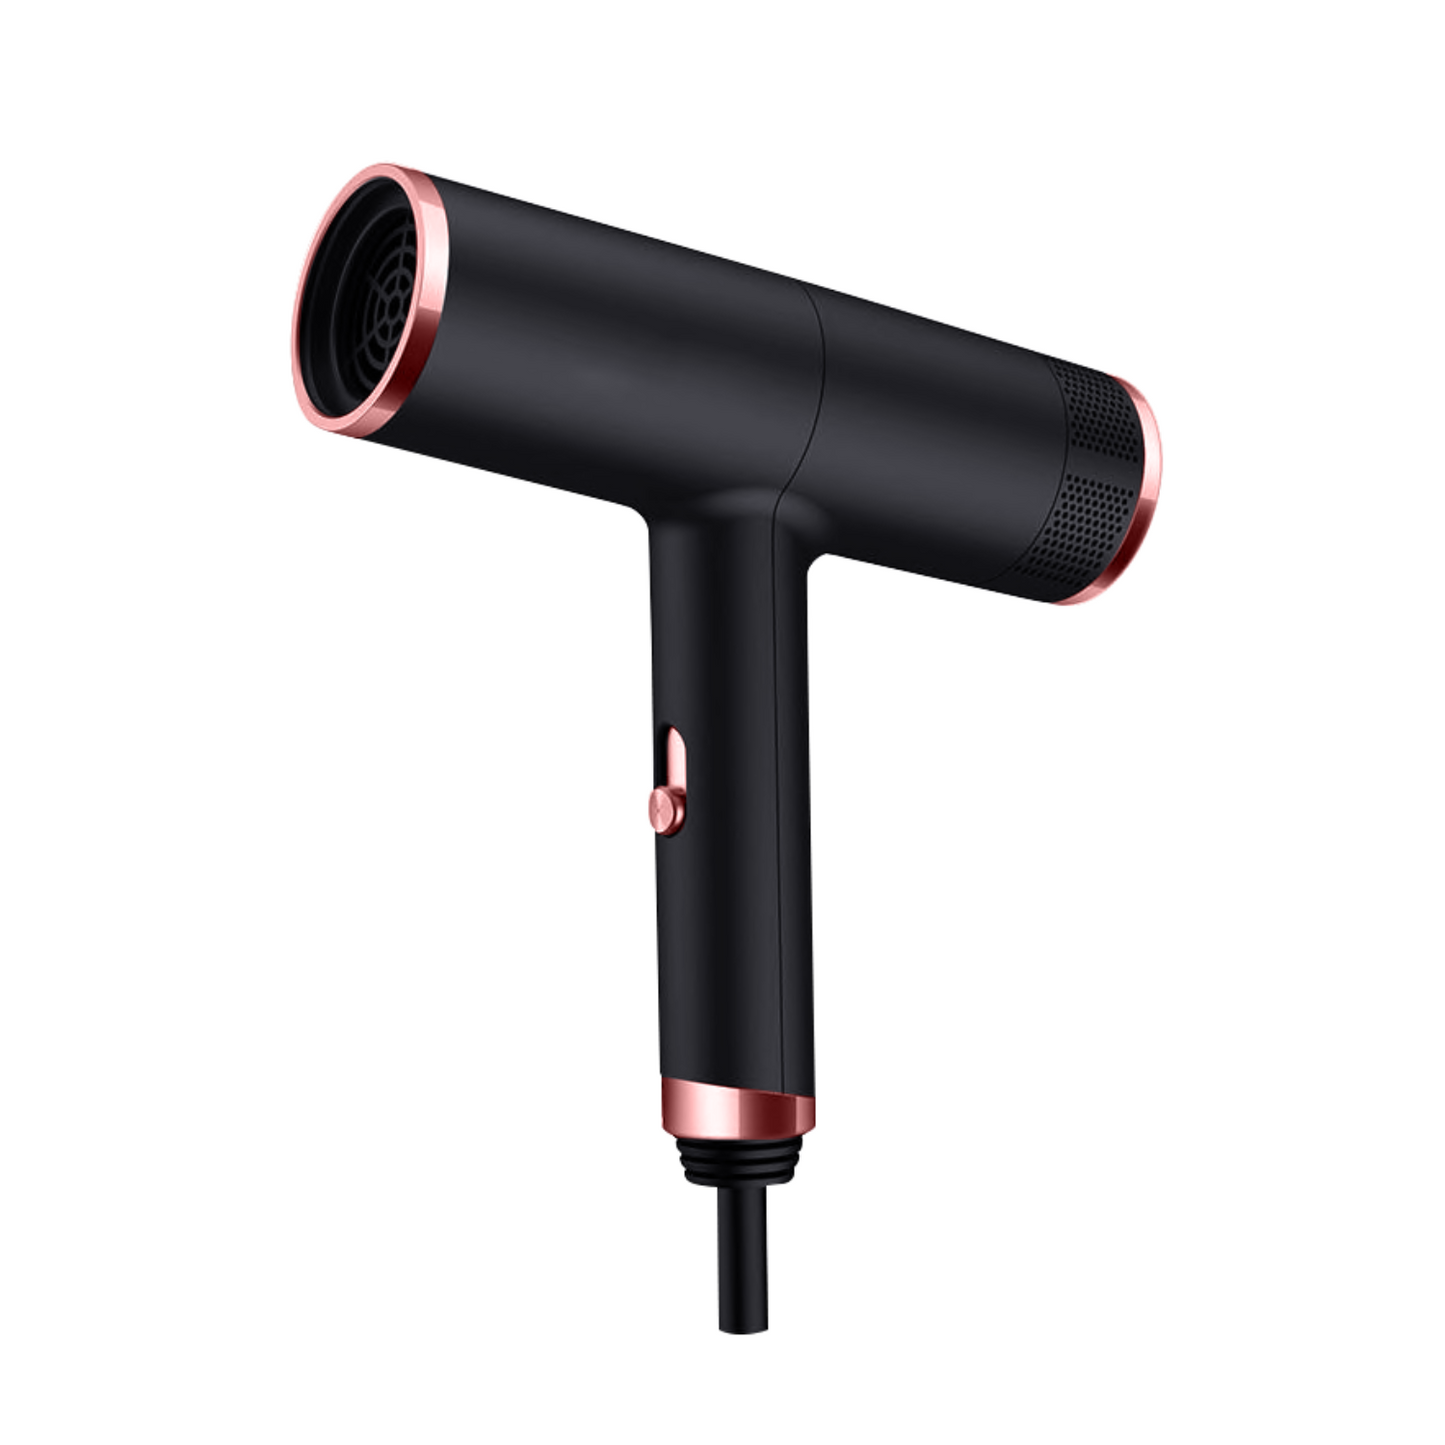 Luxe Hair Dryer - Black and Rose Gold, Personal Styling Tool